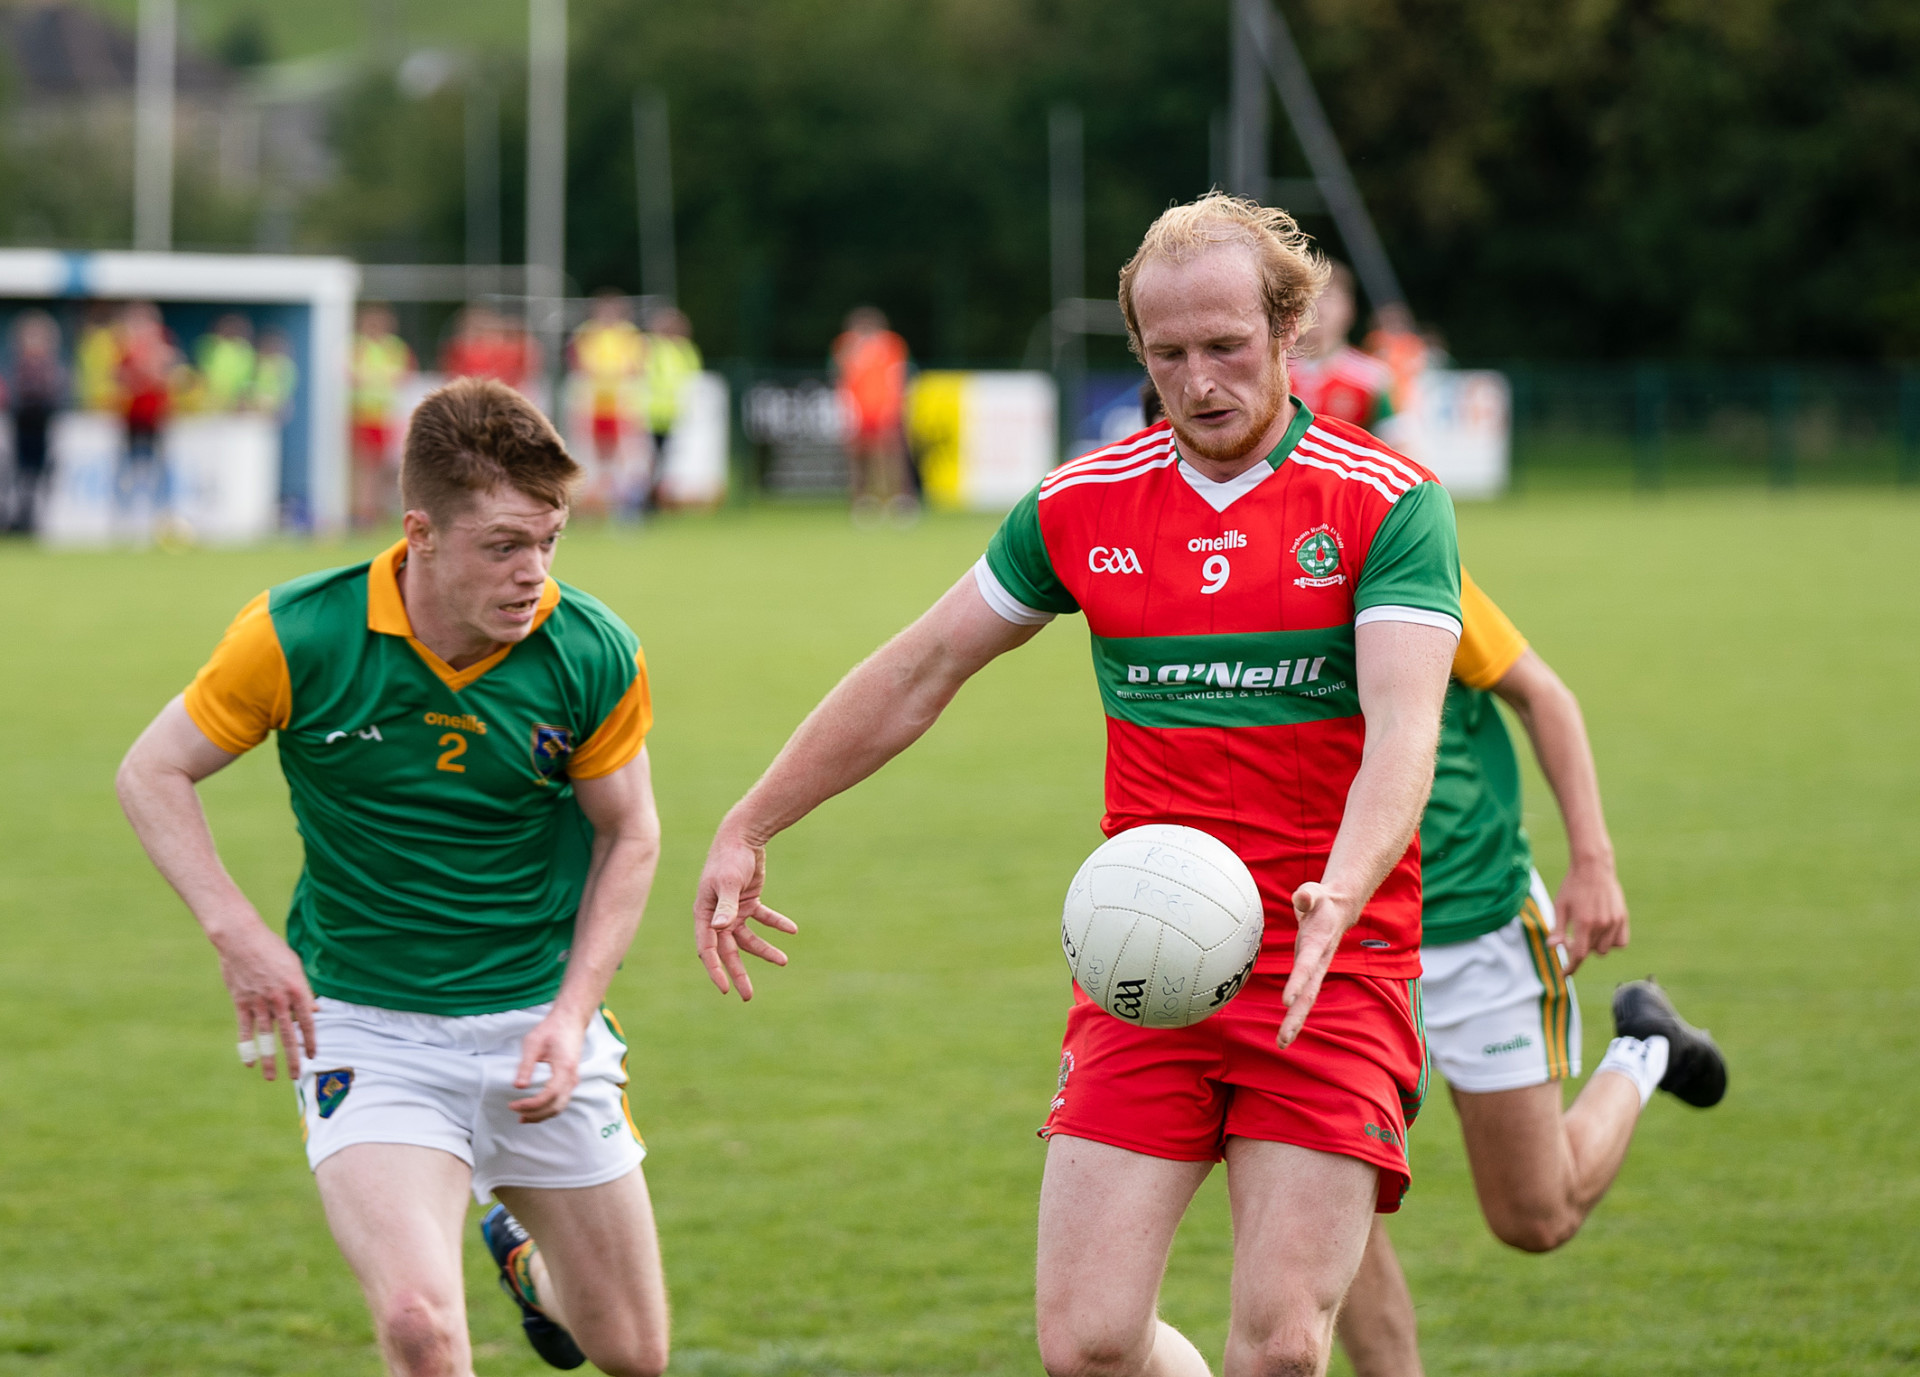 Owen Roes boss wants a more clinical edge